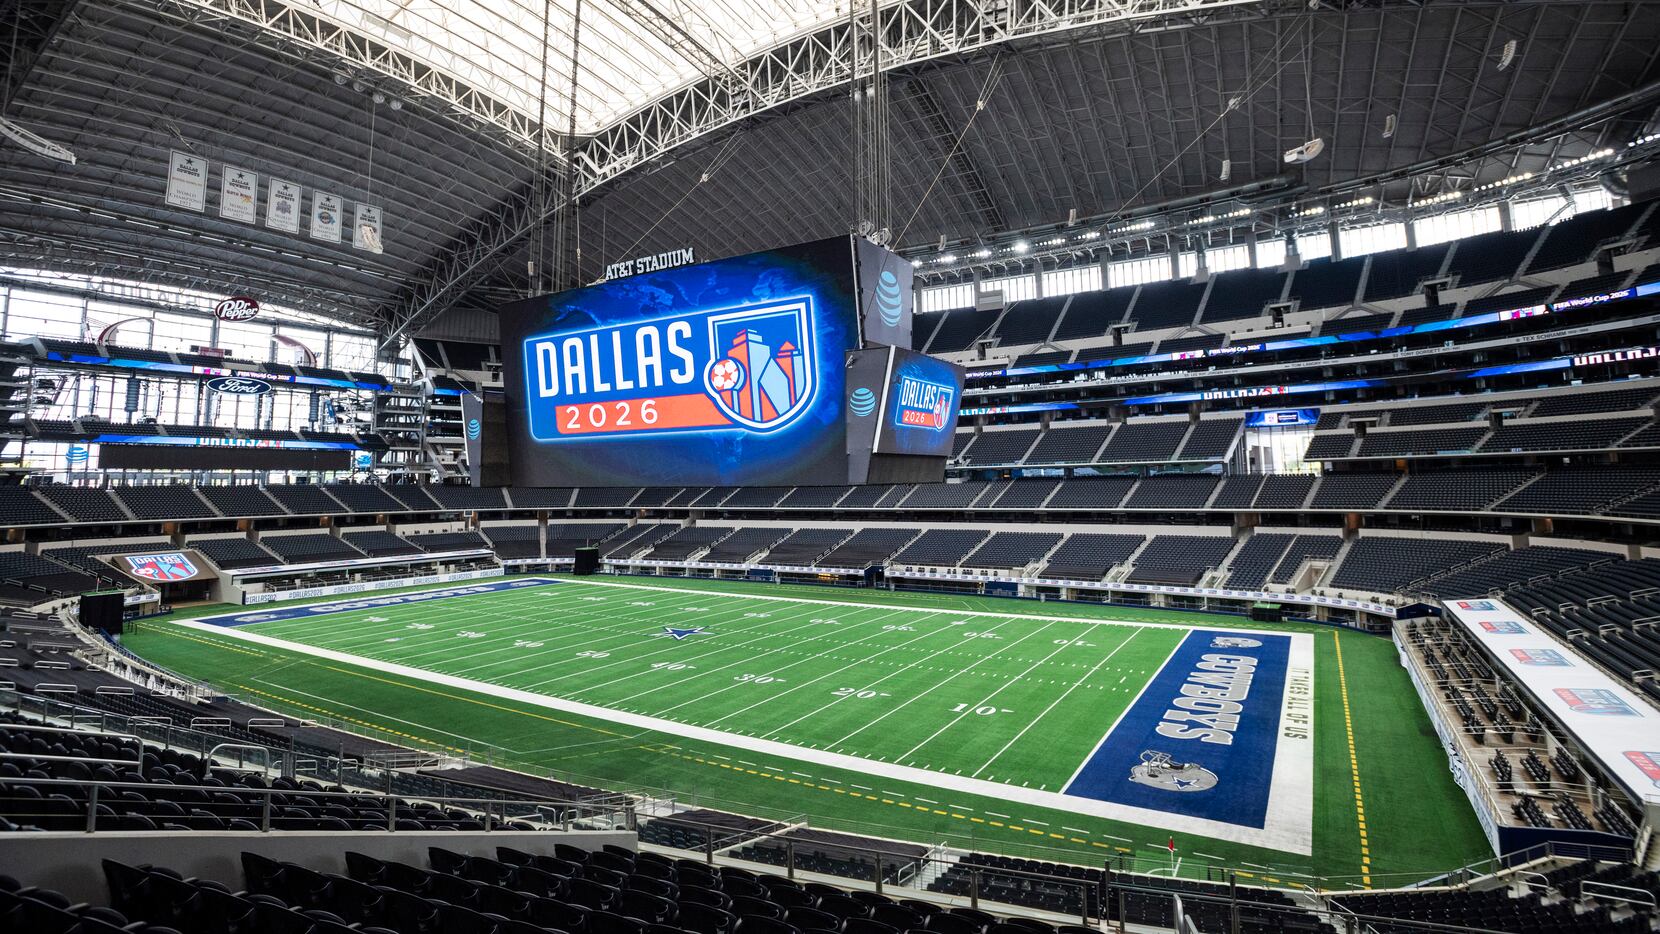 Dallas 2026 candidate host city logos are on display on the giant video board at AT&T...